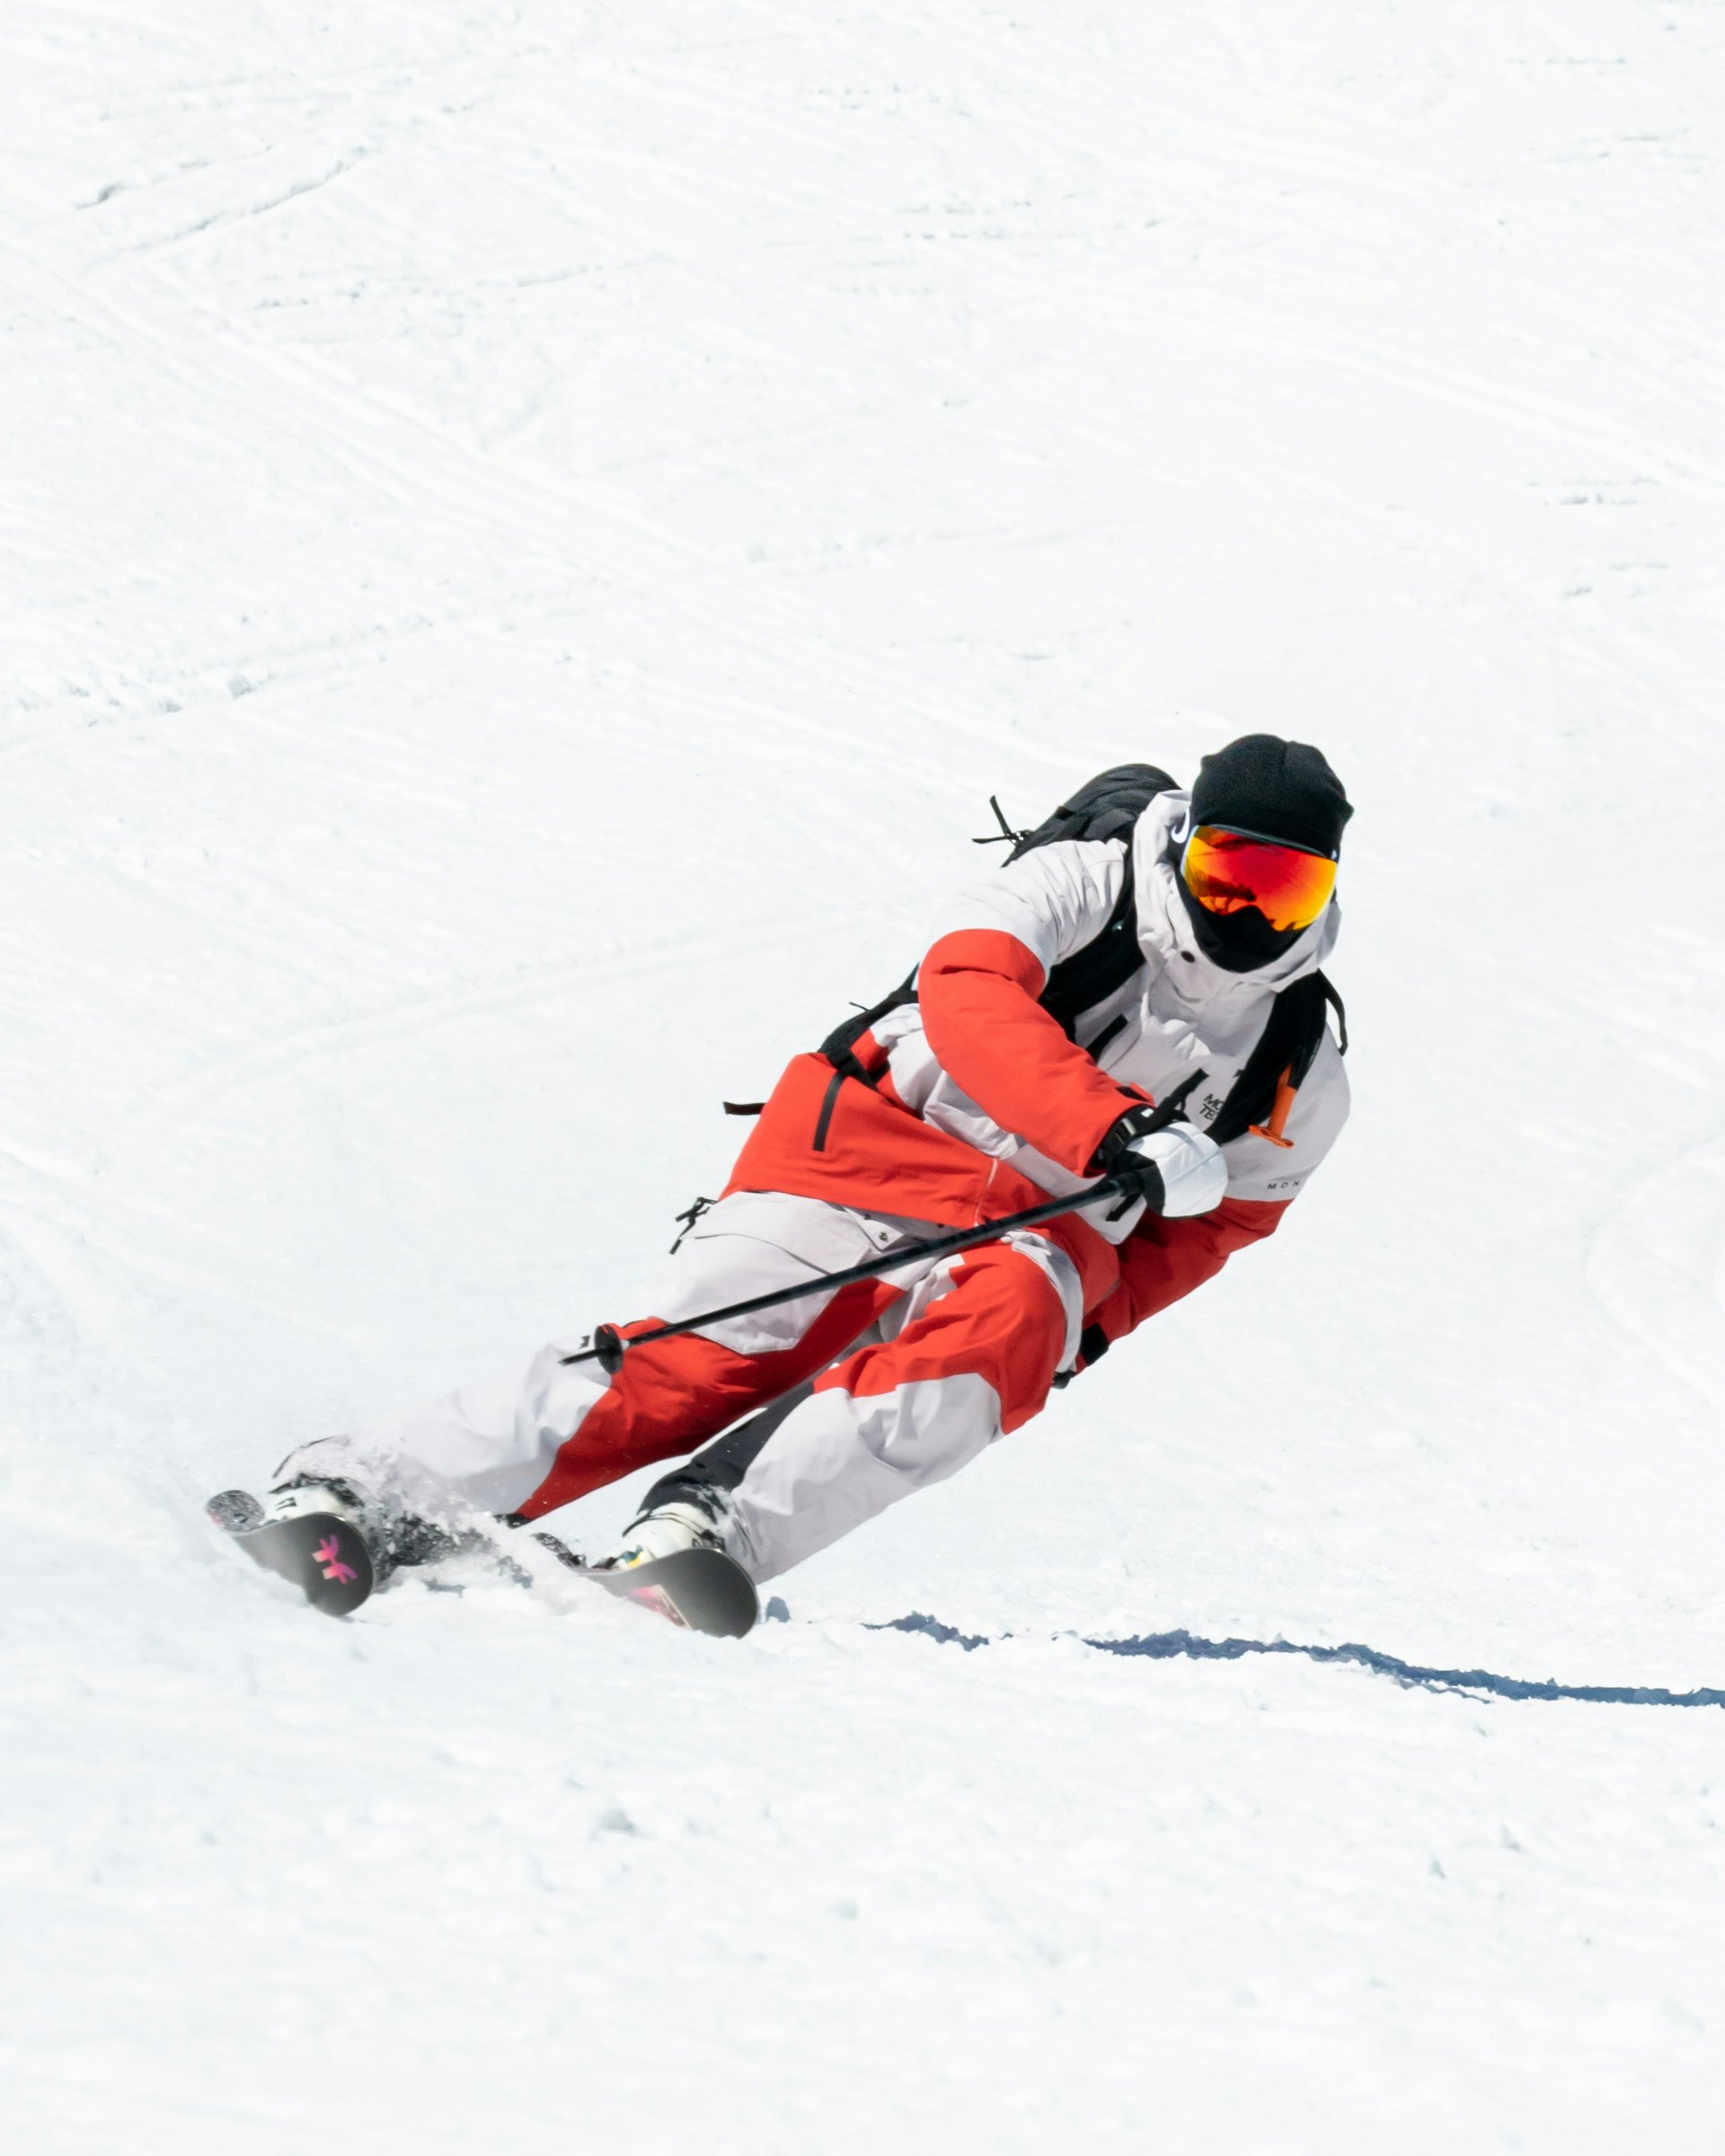 How to carve on skis: A step-by-step guide